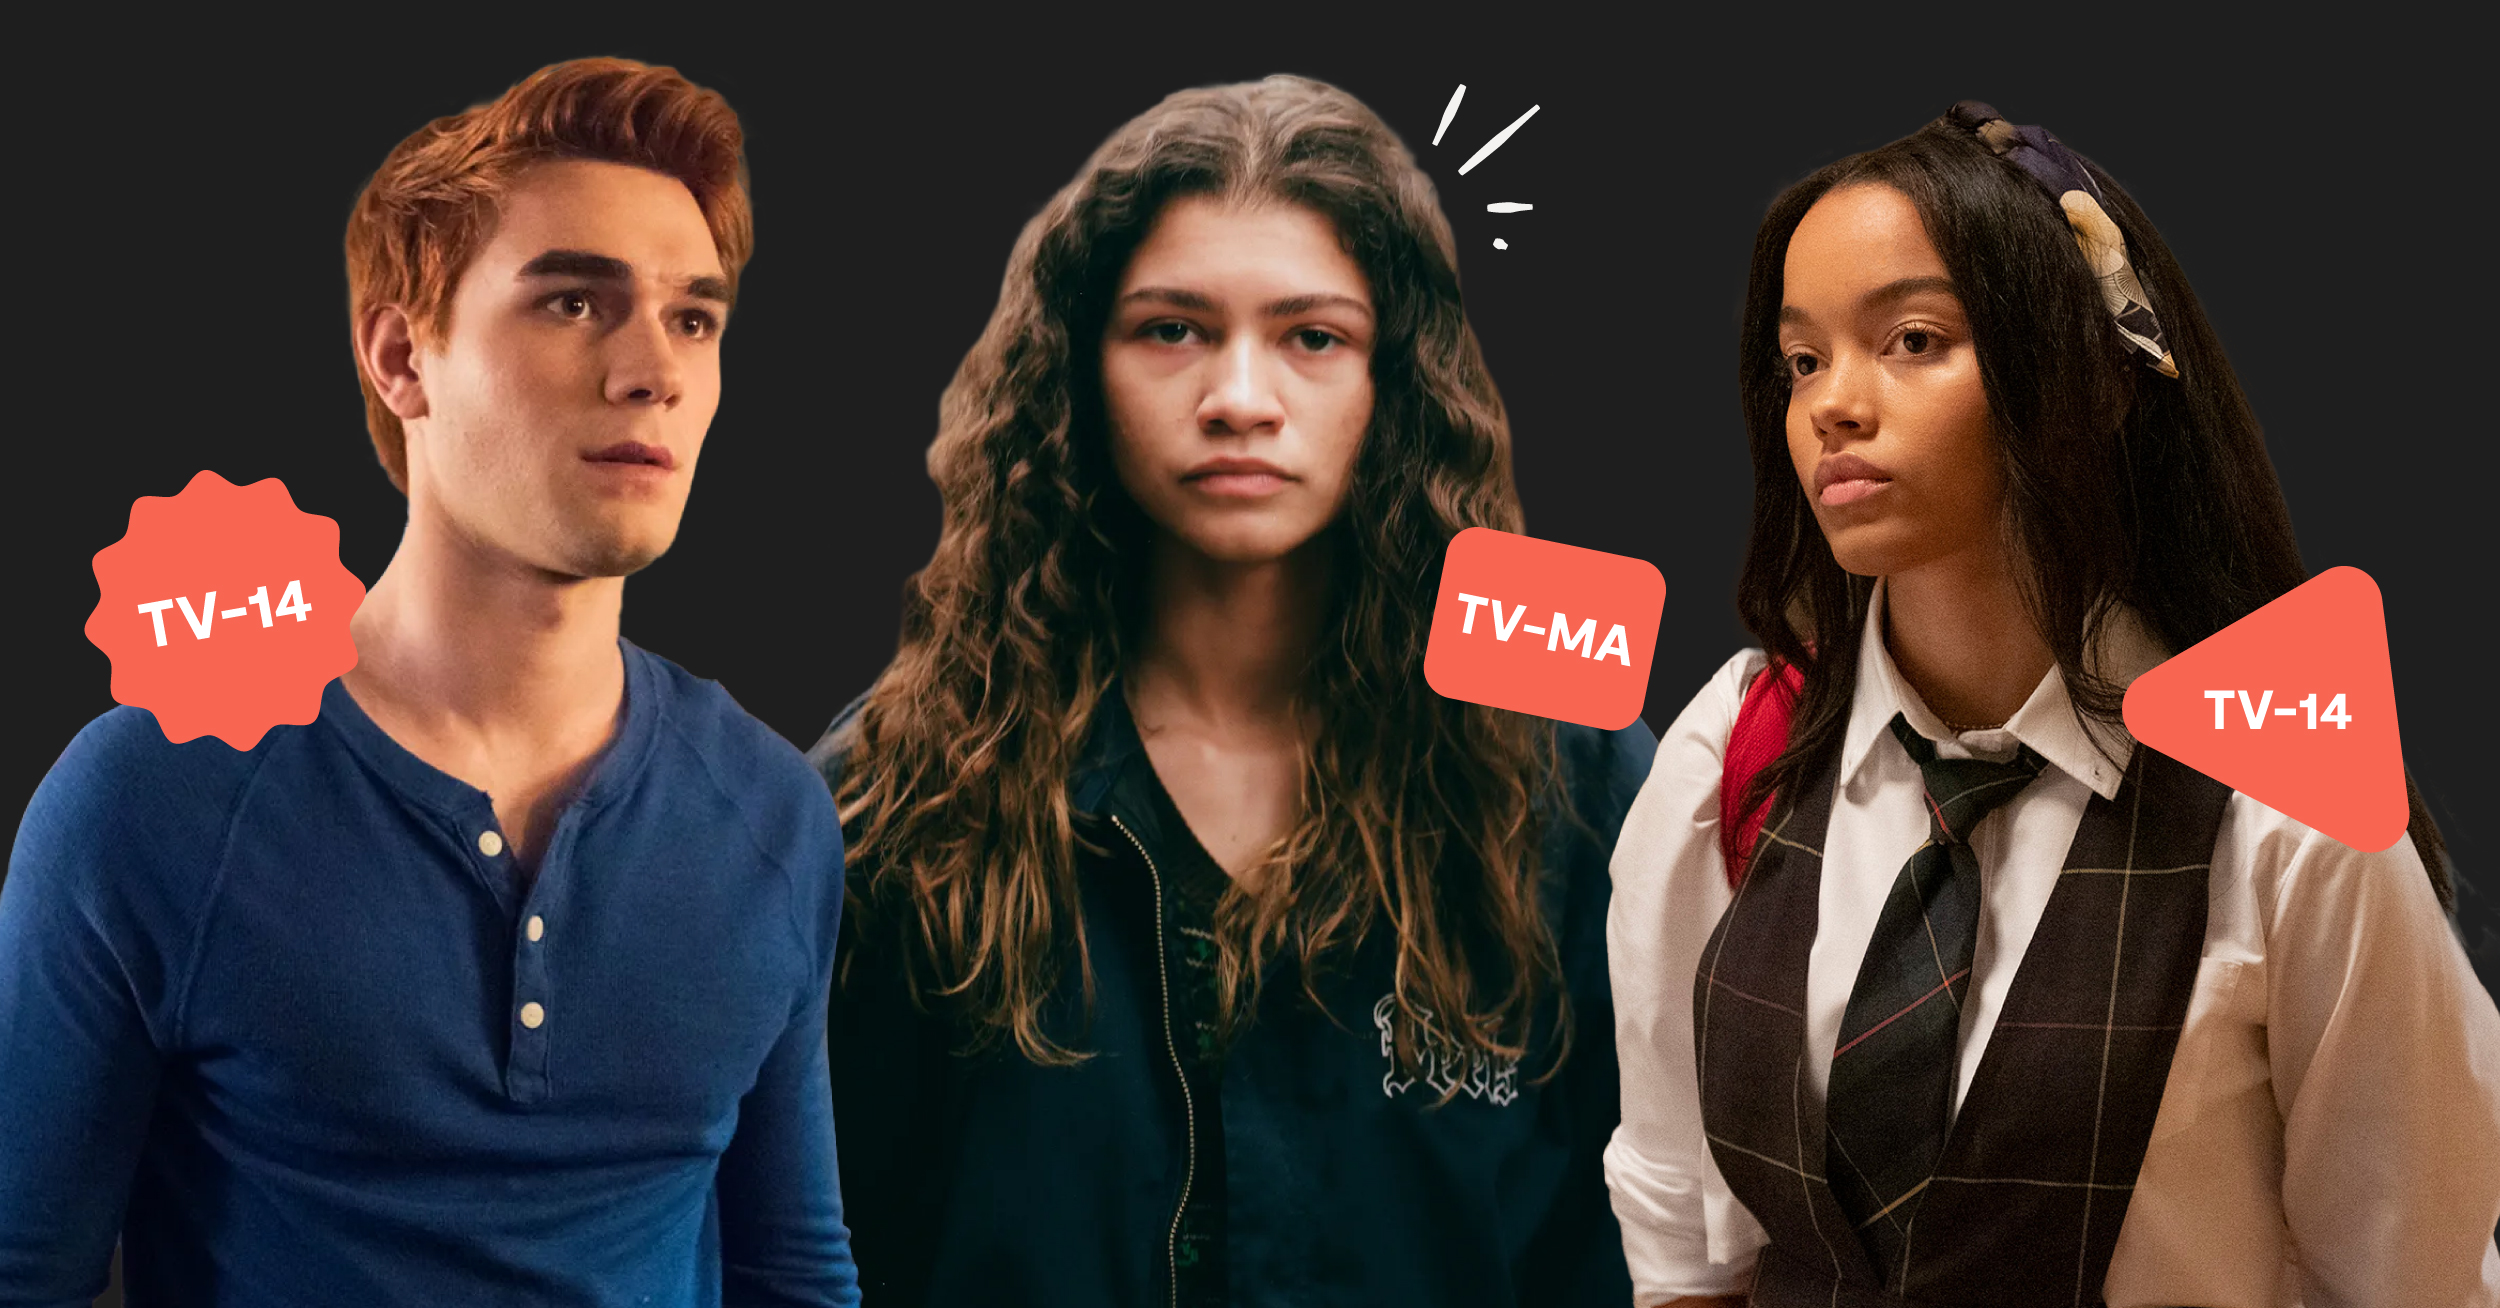 7 Shows About Teens That Arent For Teens Bark photo photo pic